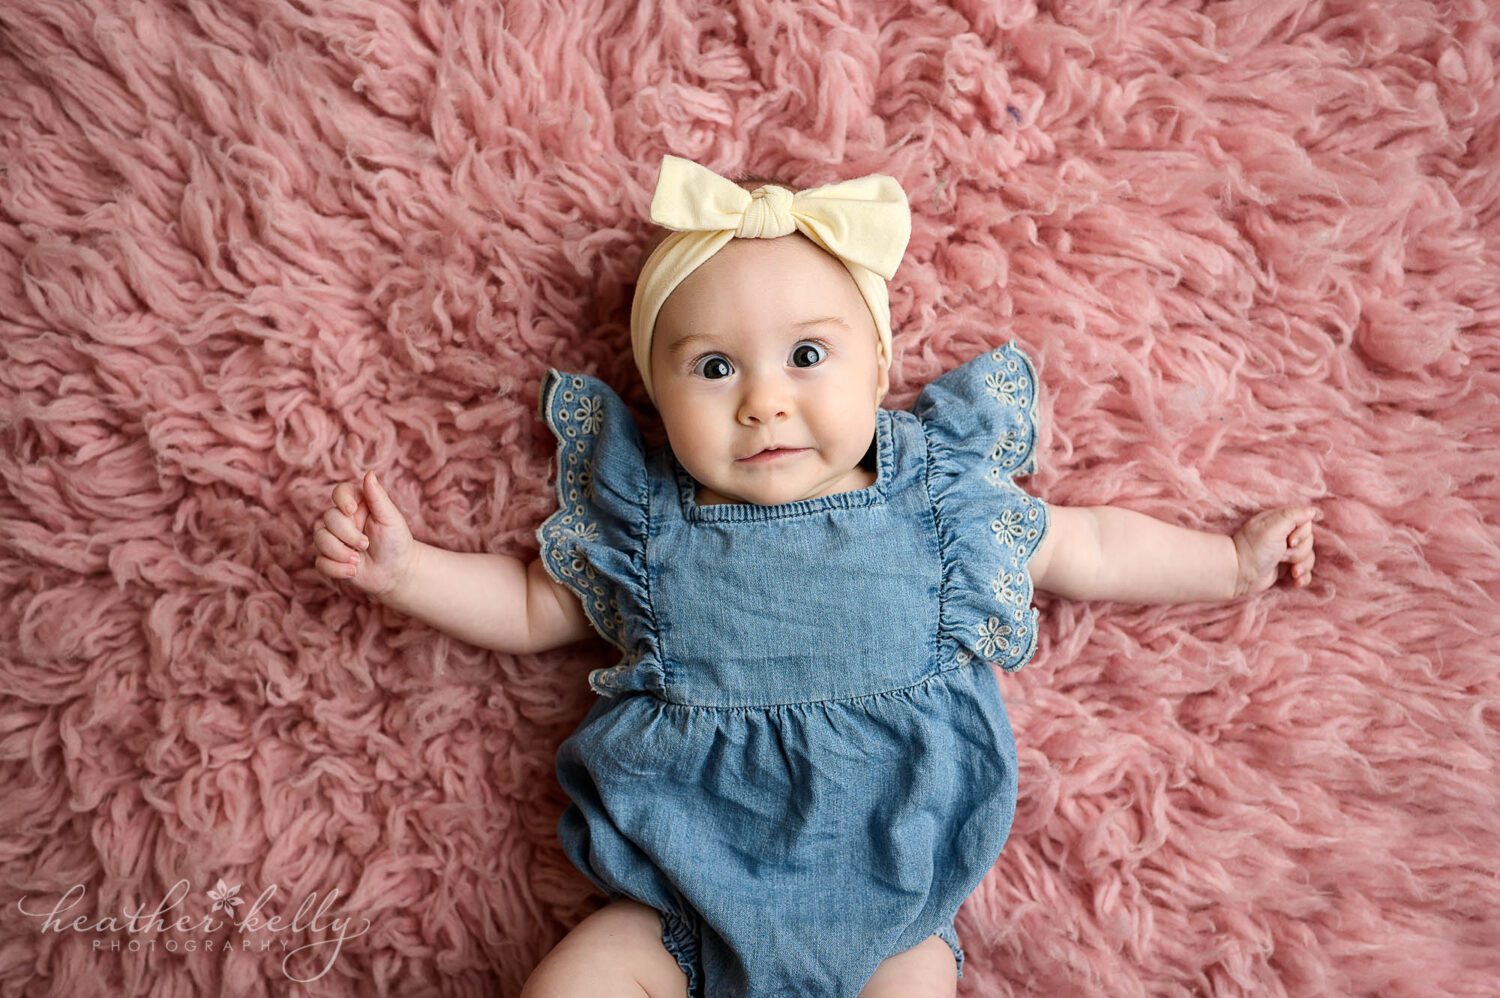 A baby girl is wearing a denim one piece outfit with ruffles on the short sleeves. She has a cream bow headband and is smiling at the camera. 